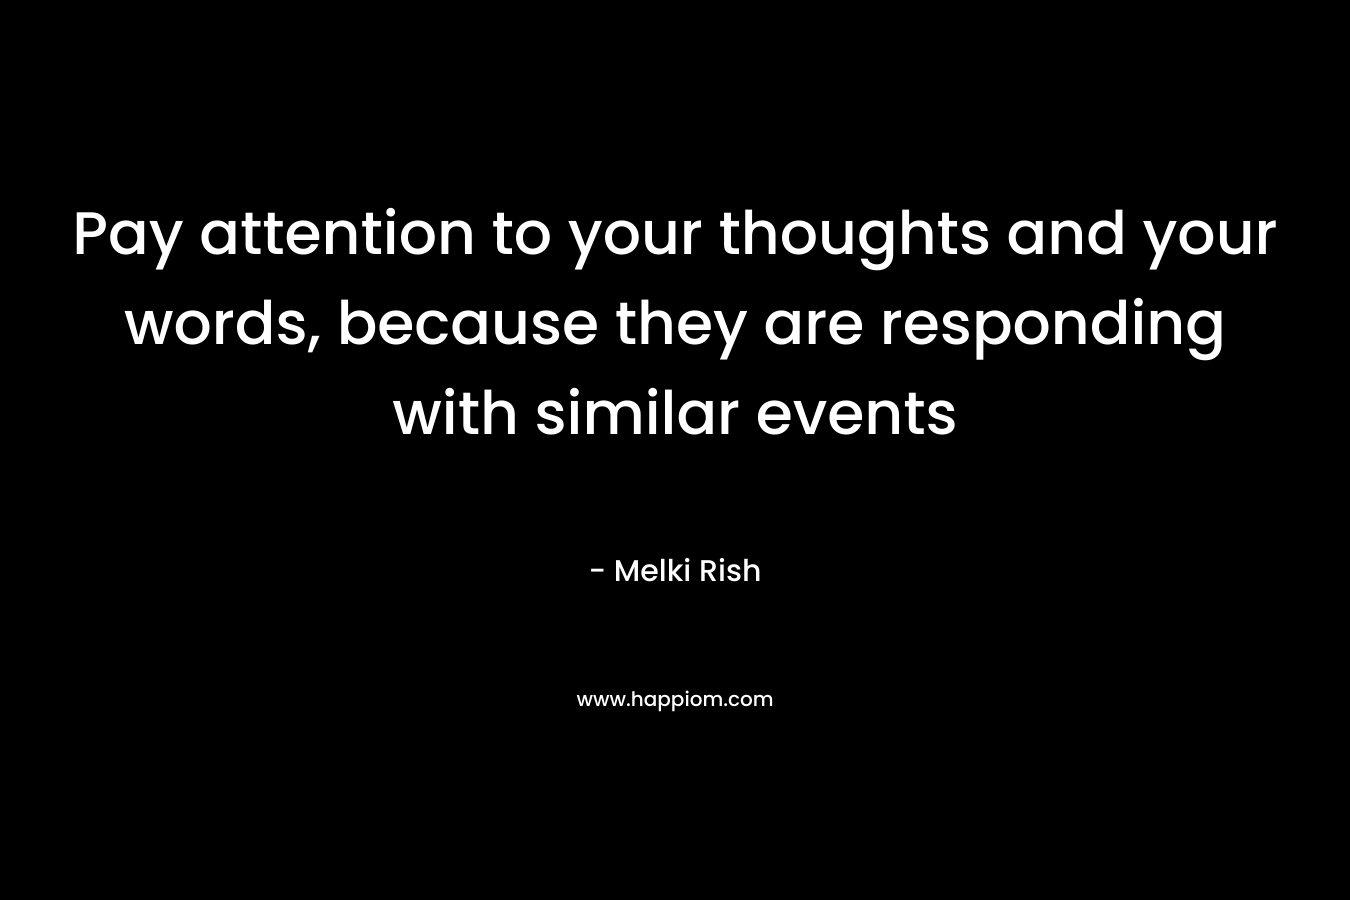 Pay attention to your thoughts and your words, because they are responding with similar events – Melki Rish